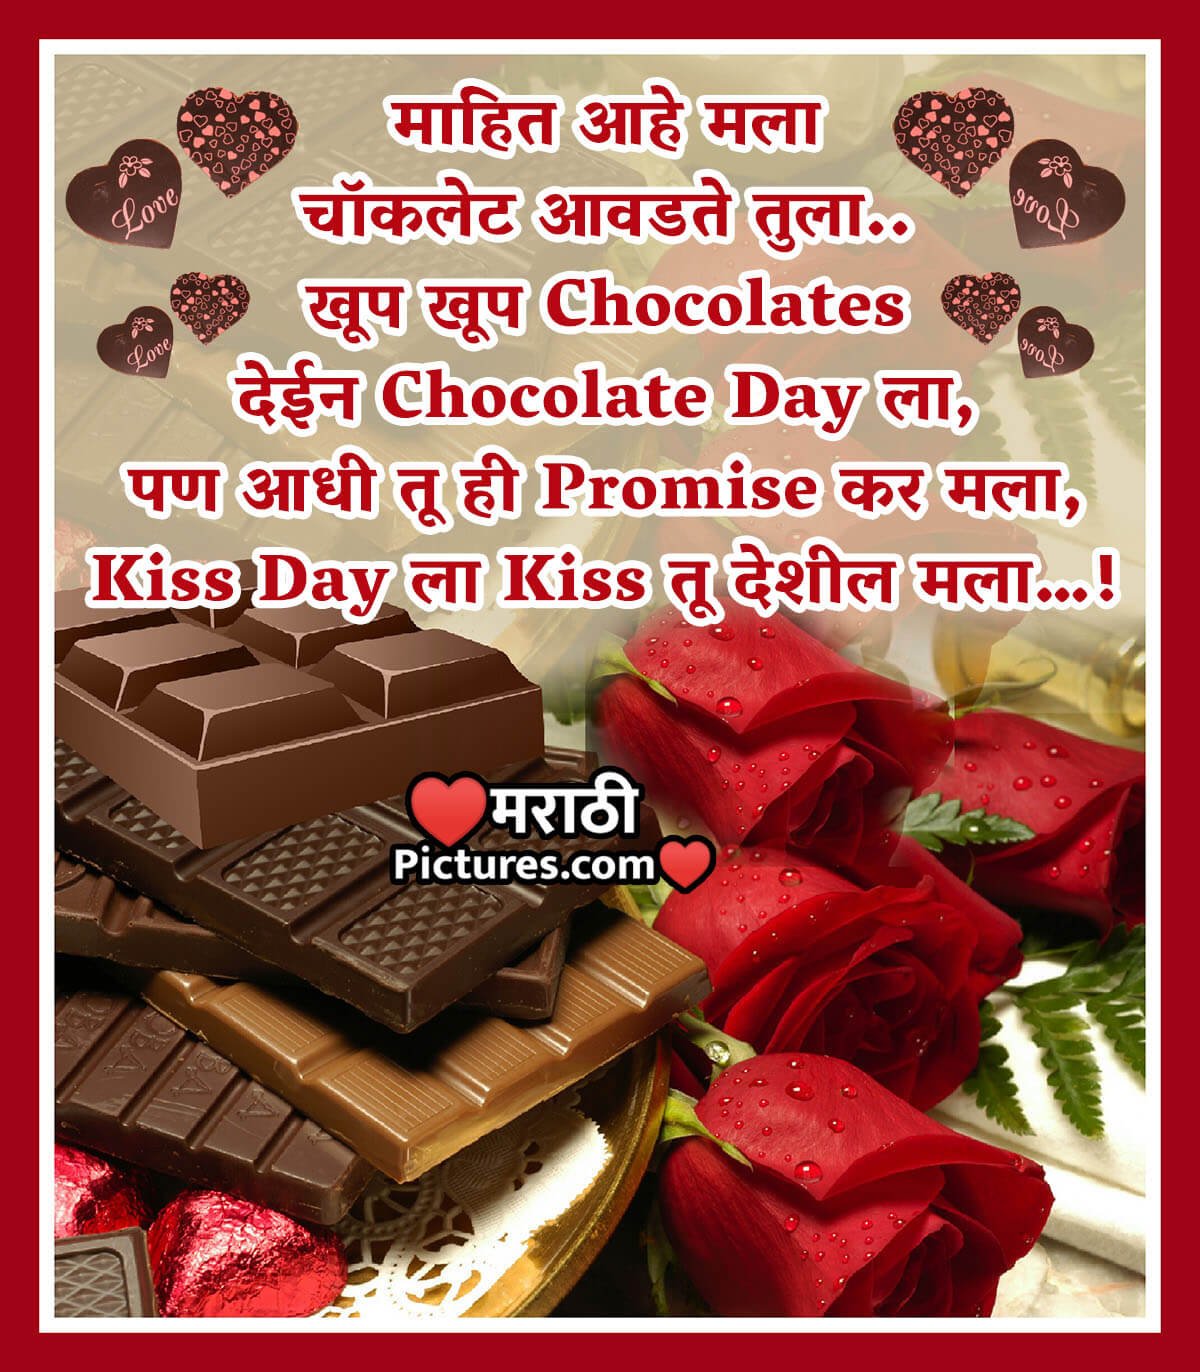 Chocolate Day Promise Message In Marathi